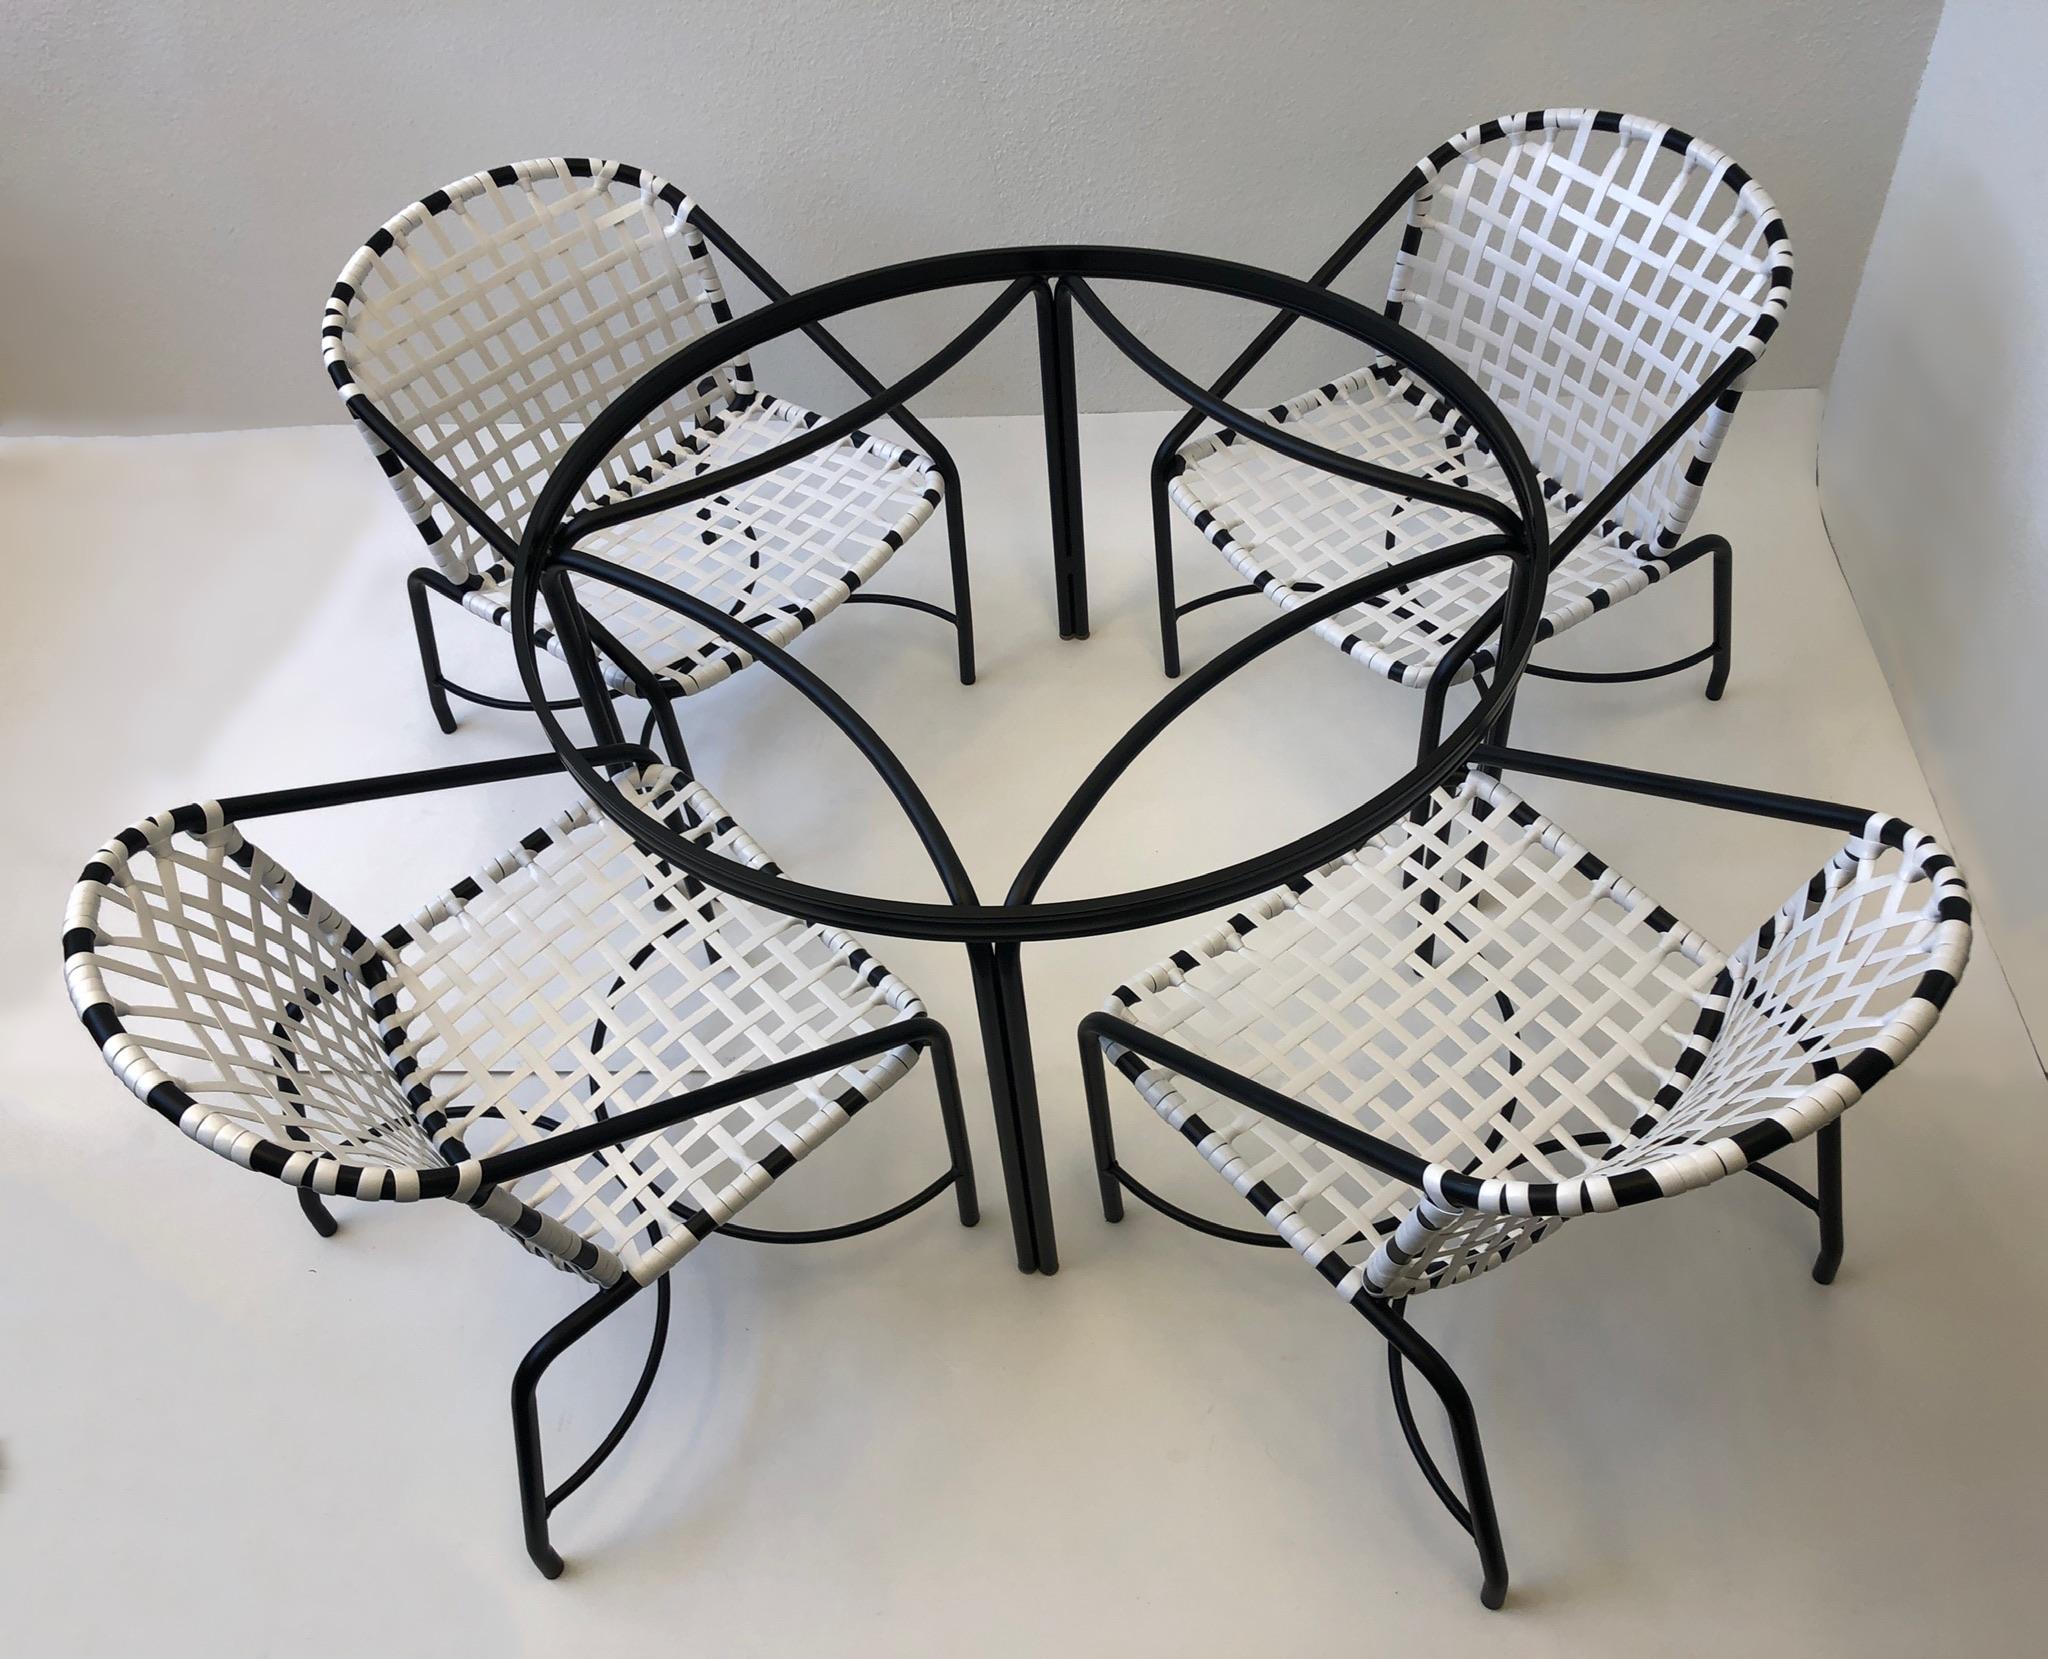 1950’s iconic “Kantan” Patio set design by Tadao Inouye for Brown Jordan.
The set has be newly professionally restored. 
Constructed of black powder coated aluminum and white vinyl straps.
Original glass top, shows minor wear consistent with age.